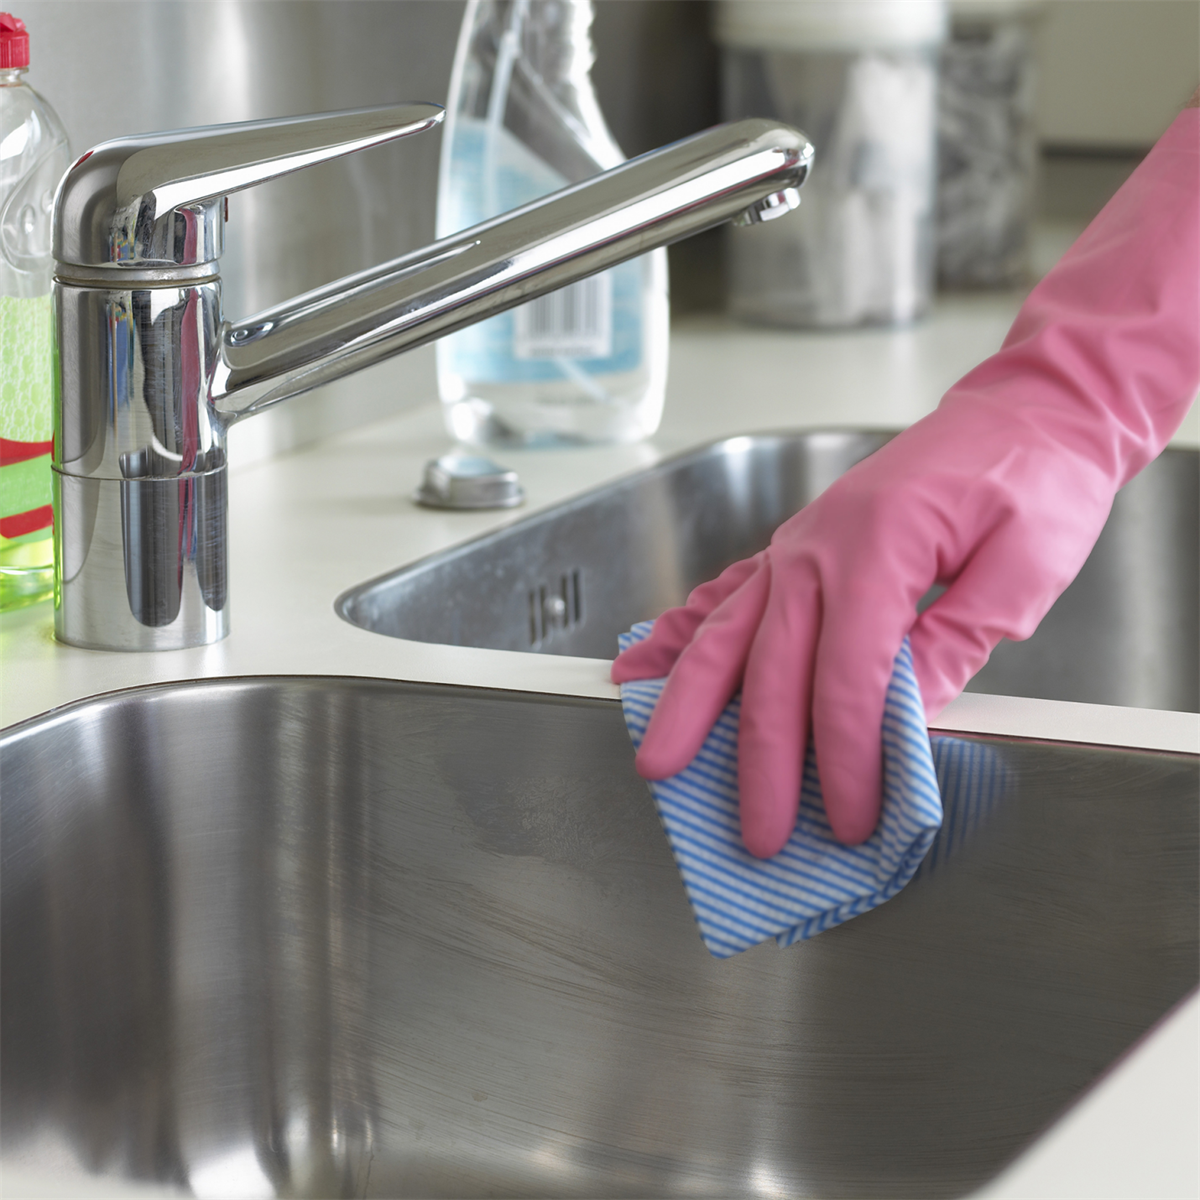 How to Prevent Rust in Stainless Steel Sinks